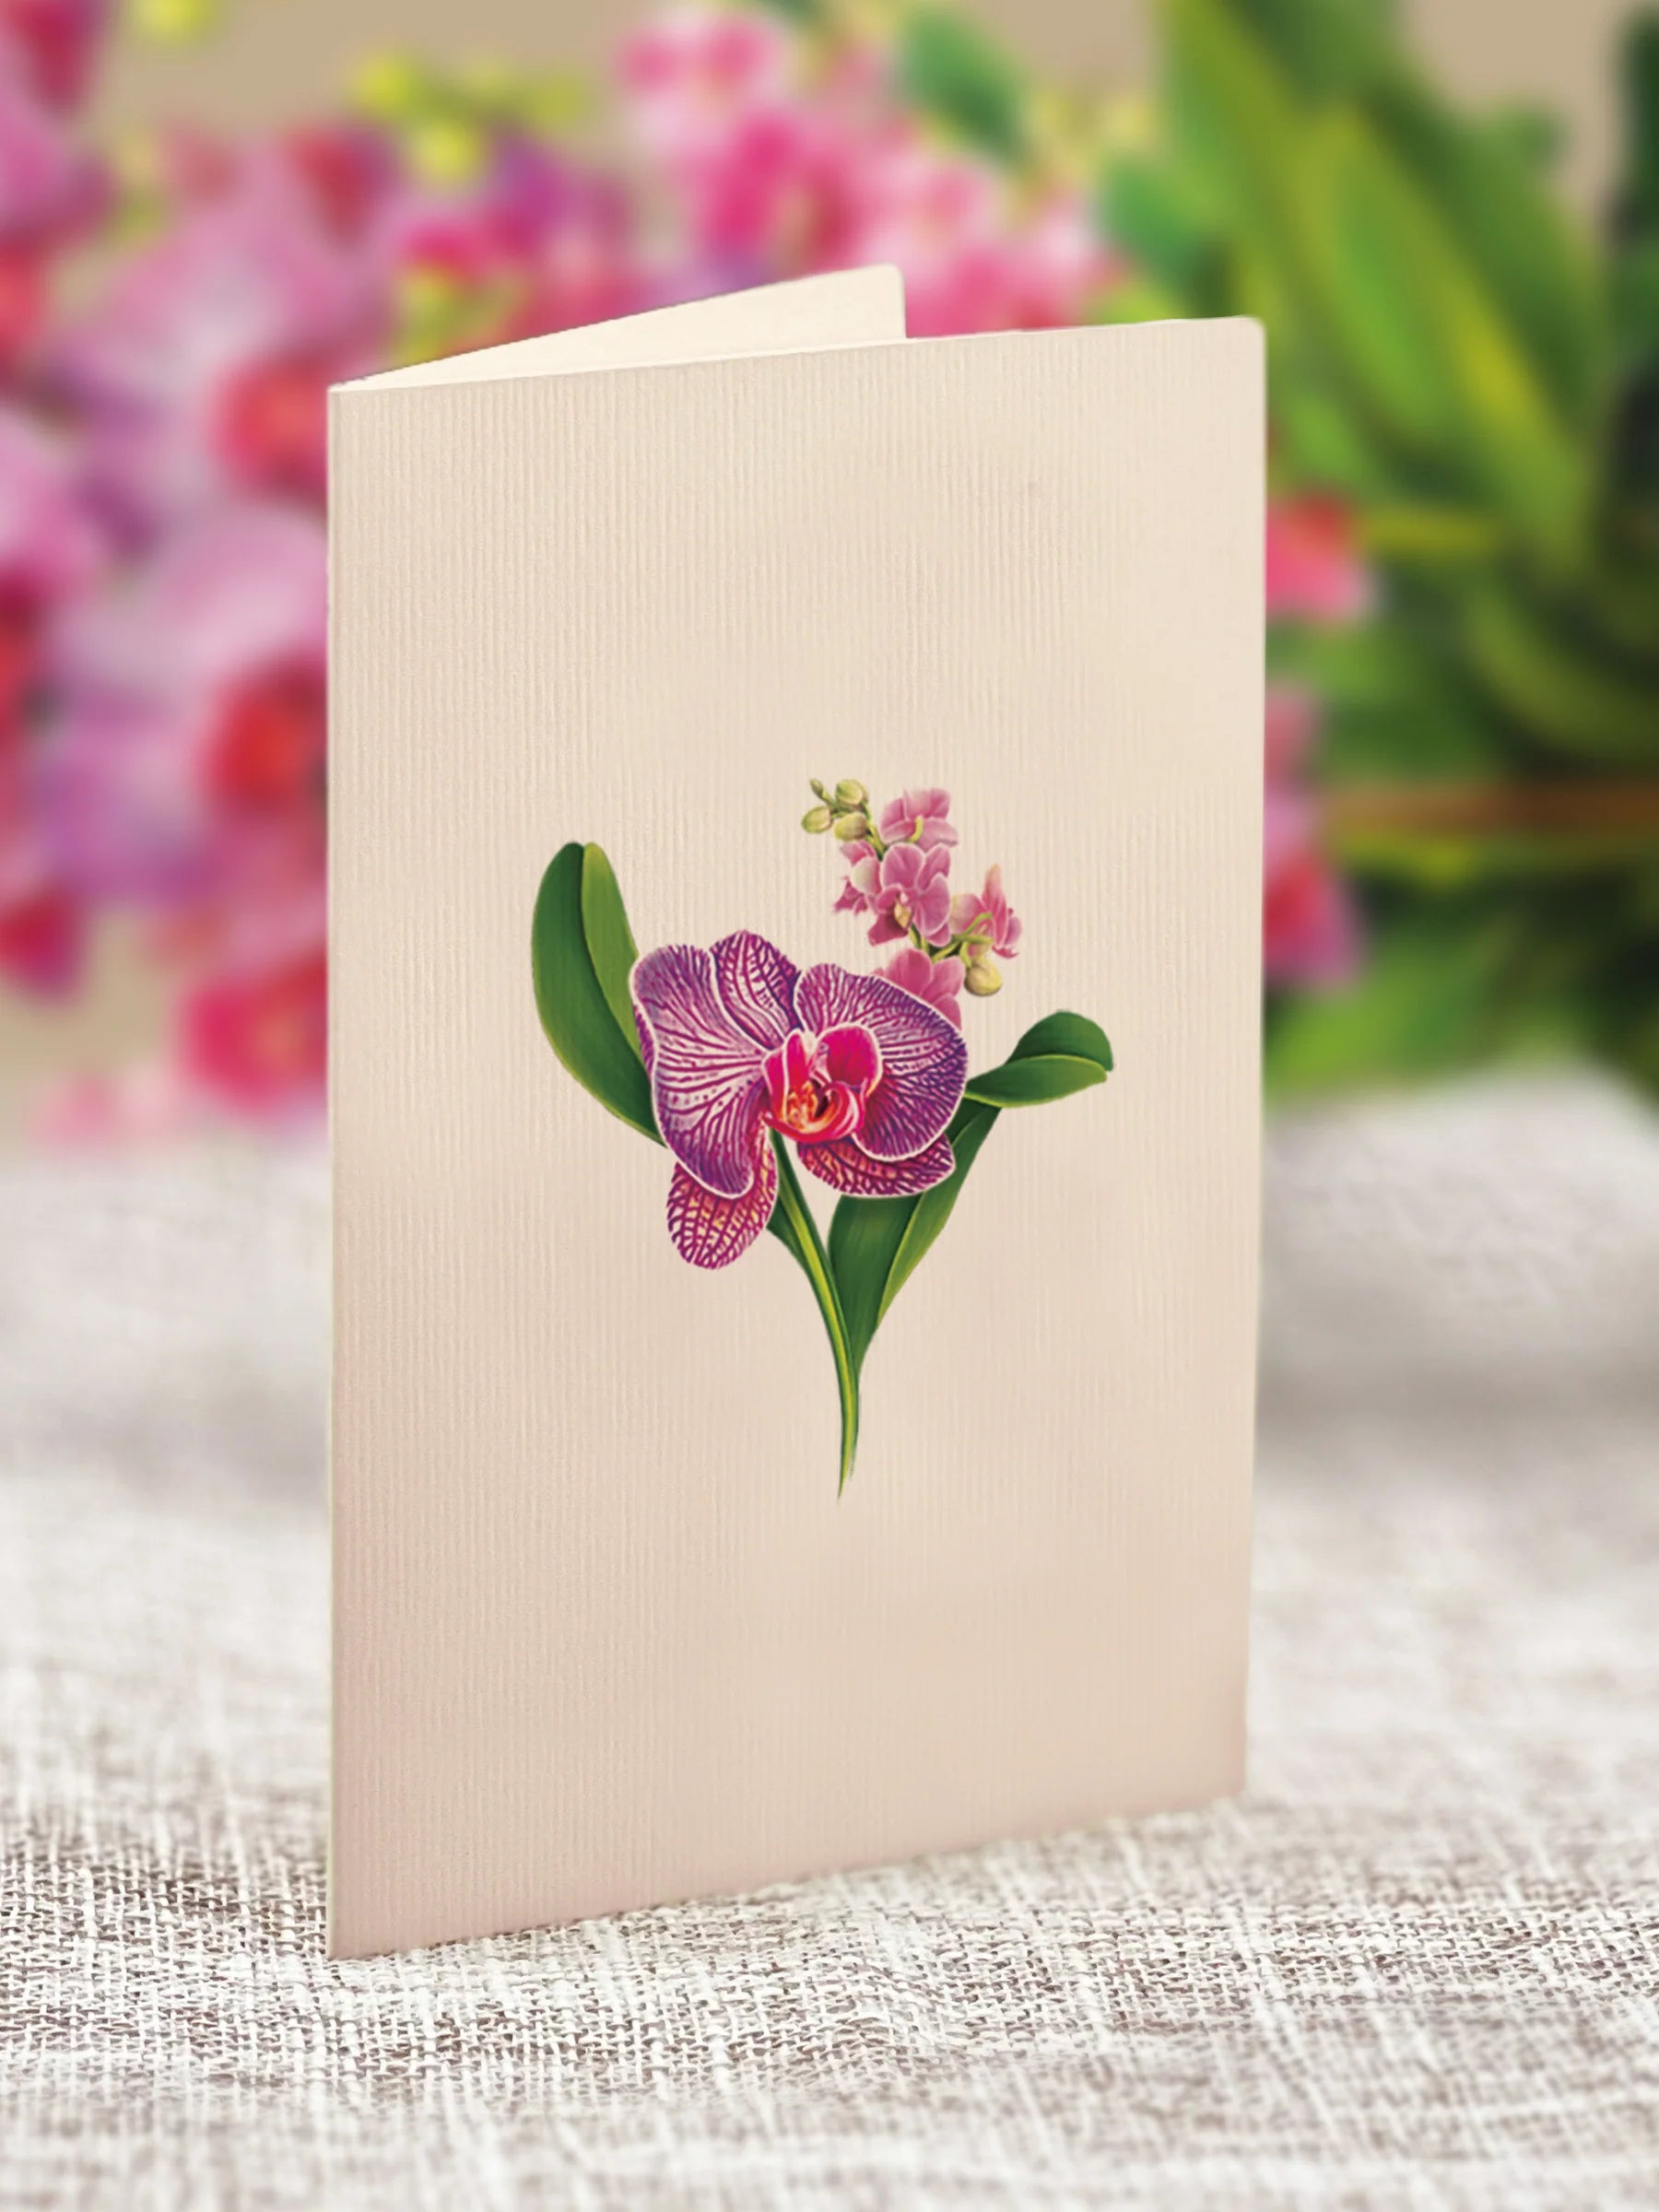 Orchid Oasis Mini Pop Up Flower Bouquet Greeting Card    